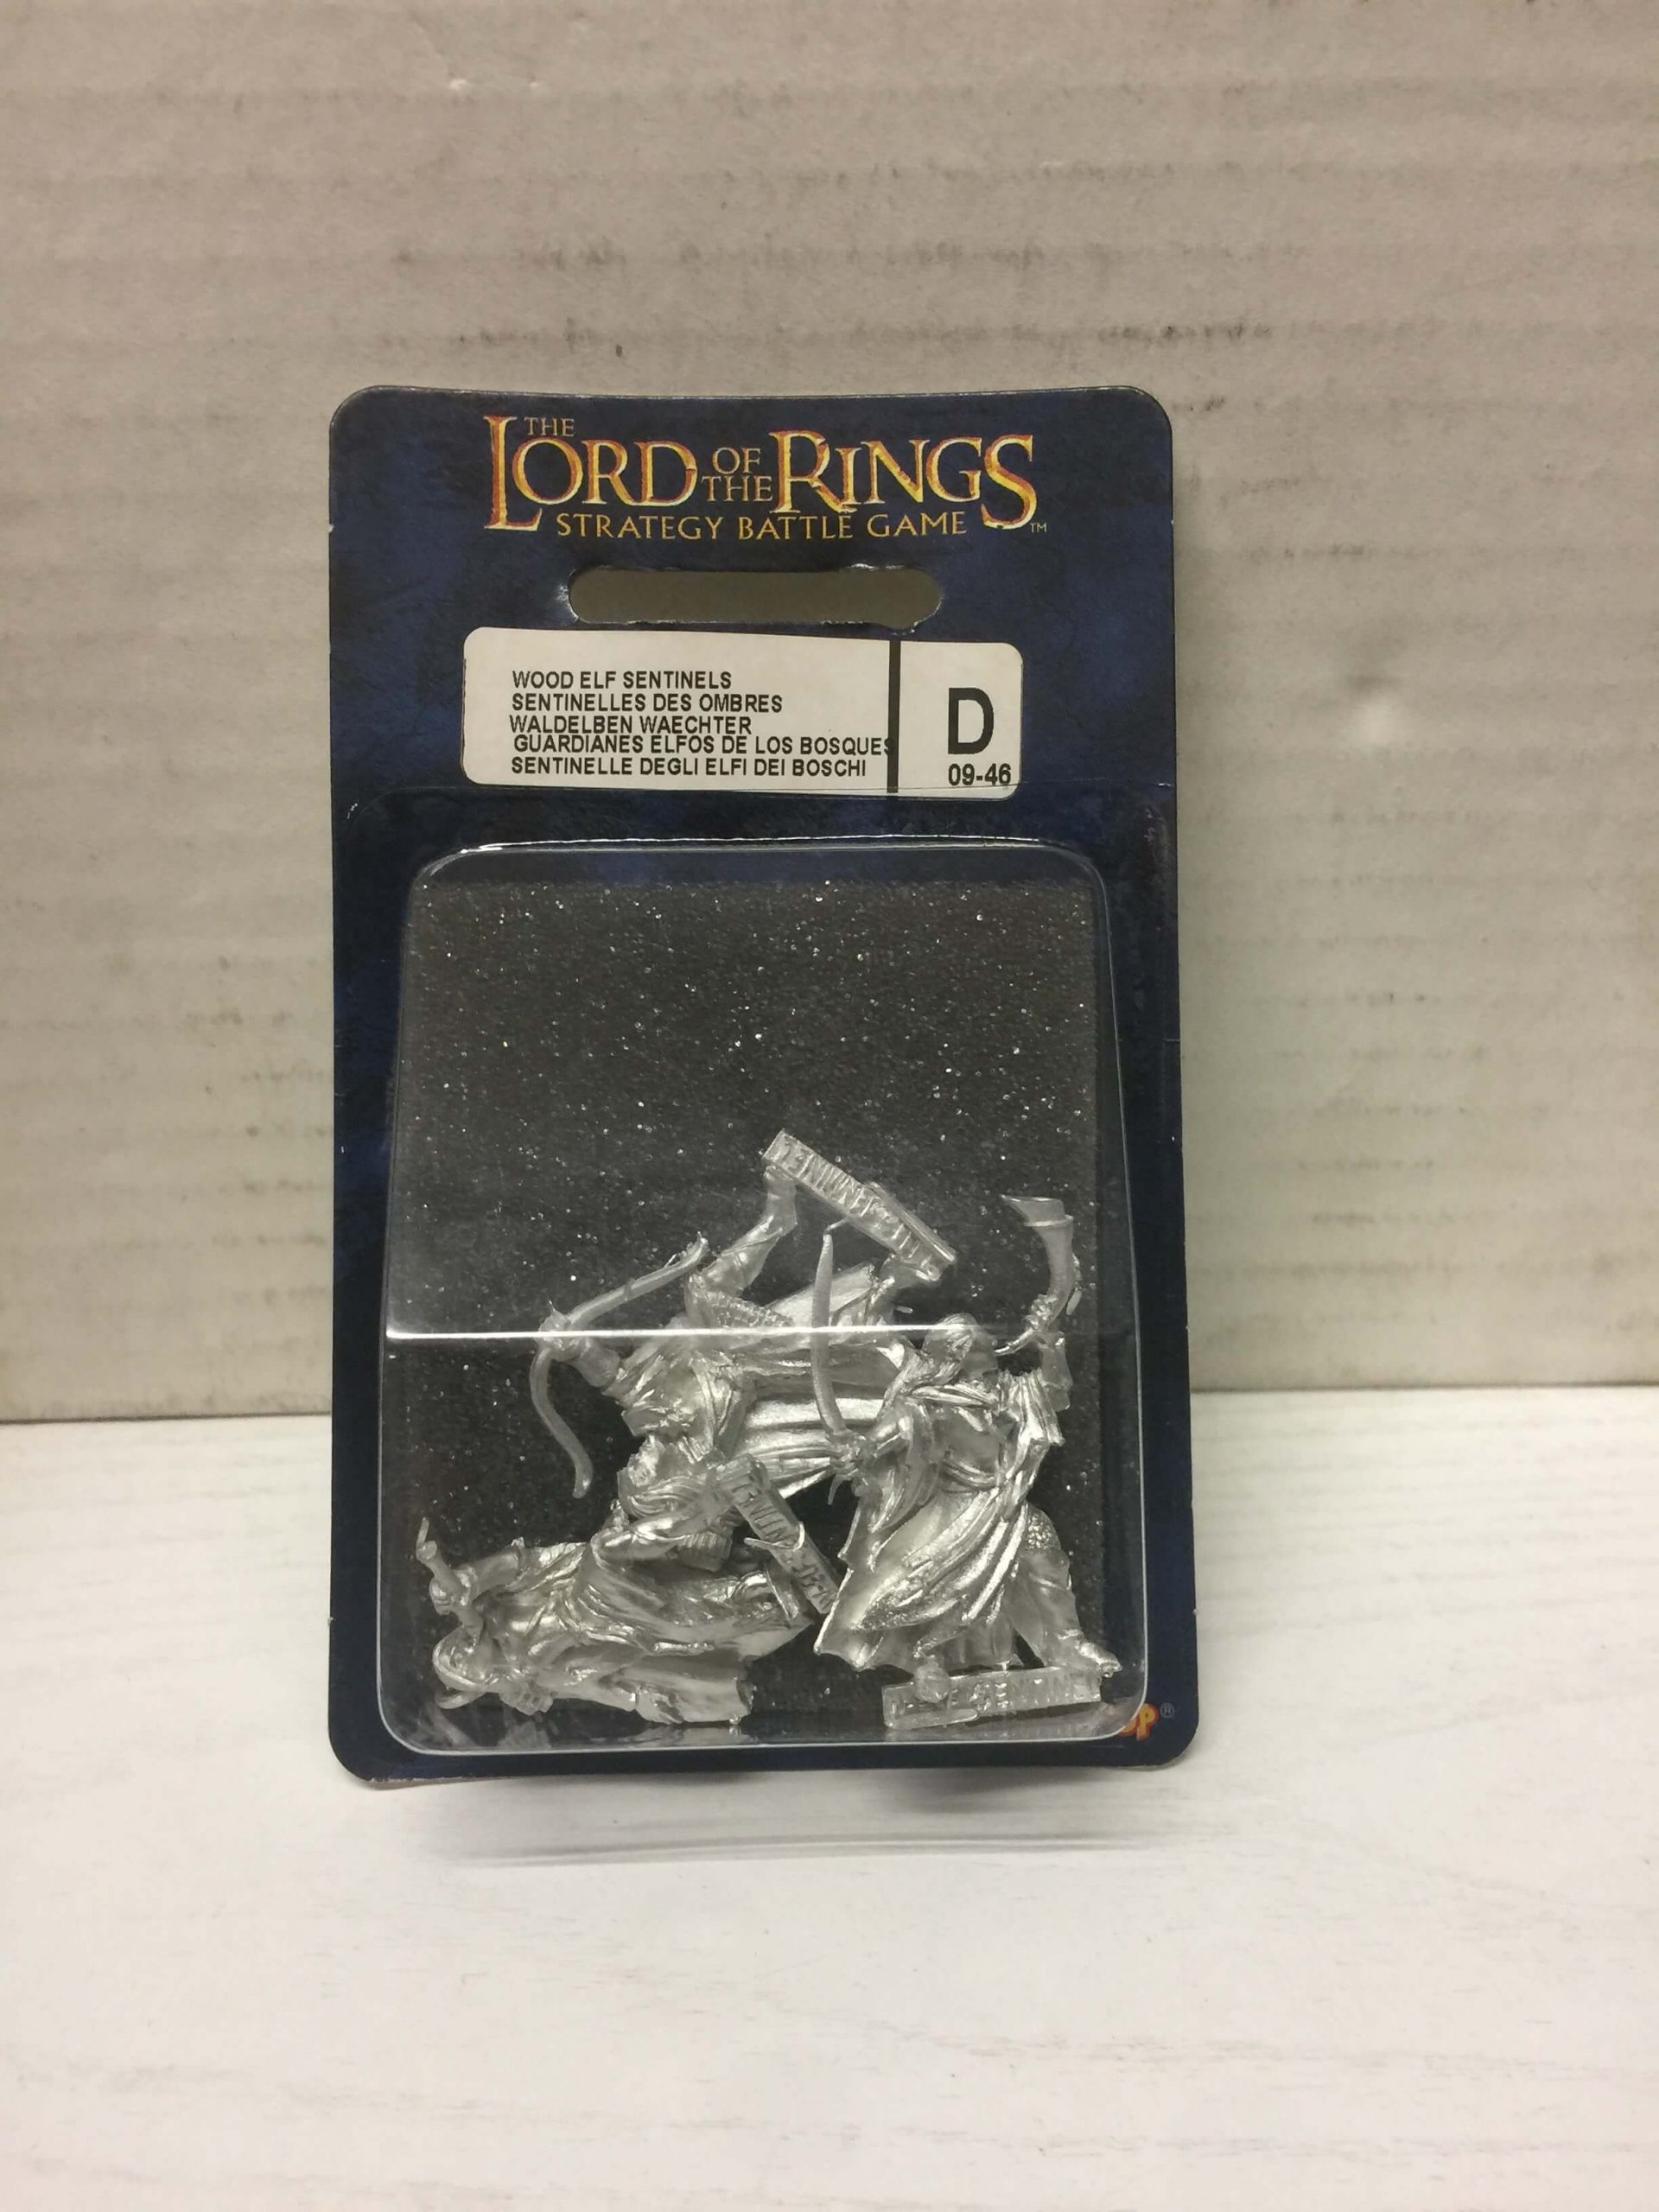 The Lord of the Rings Wood Elf Sentinels Ref 09-46